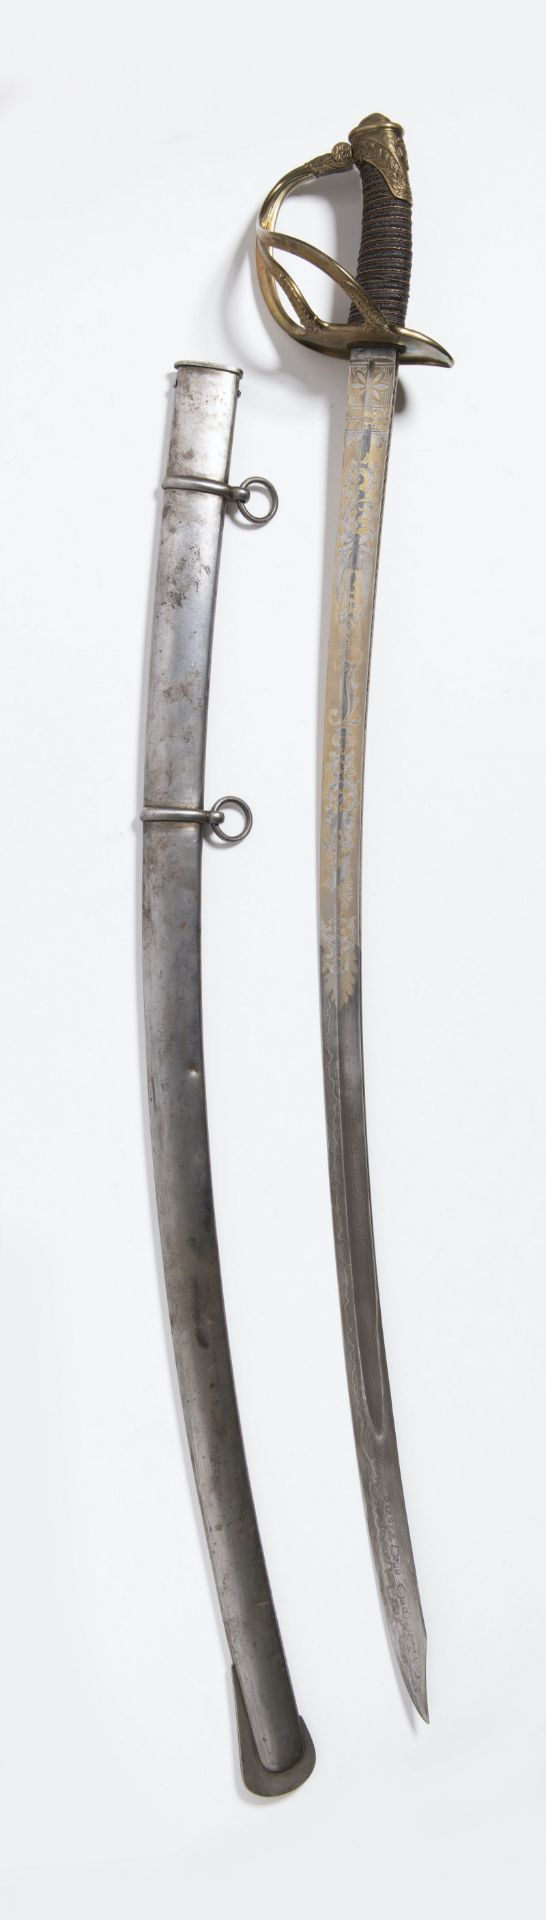 FRENCH OFFICER SABER Around the mid-19th century Steel, gilding, brass, fish skin 101 cm Looted - Image 2 of 2